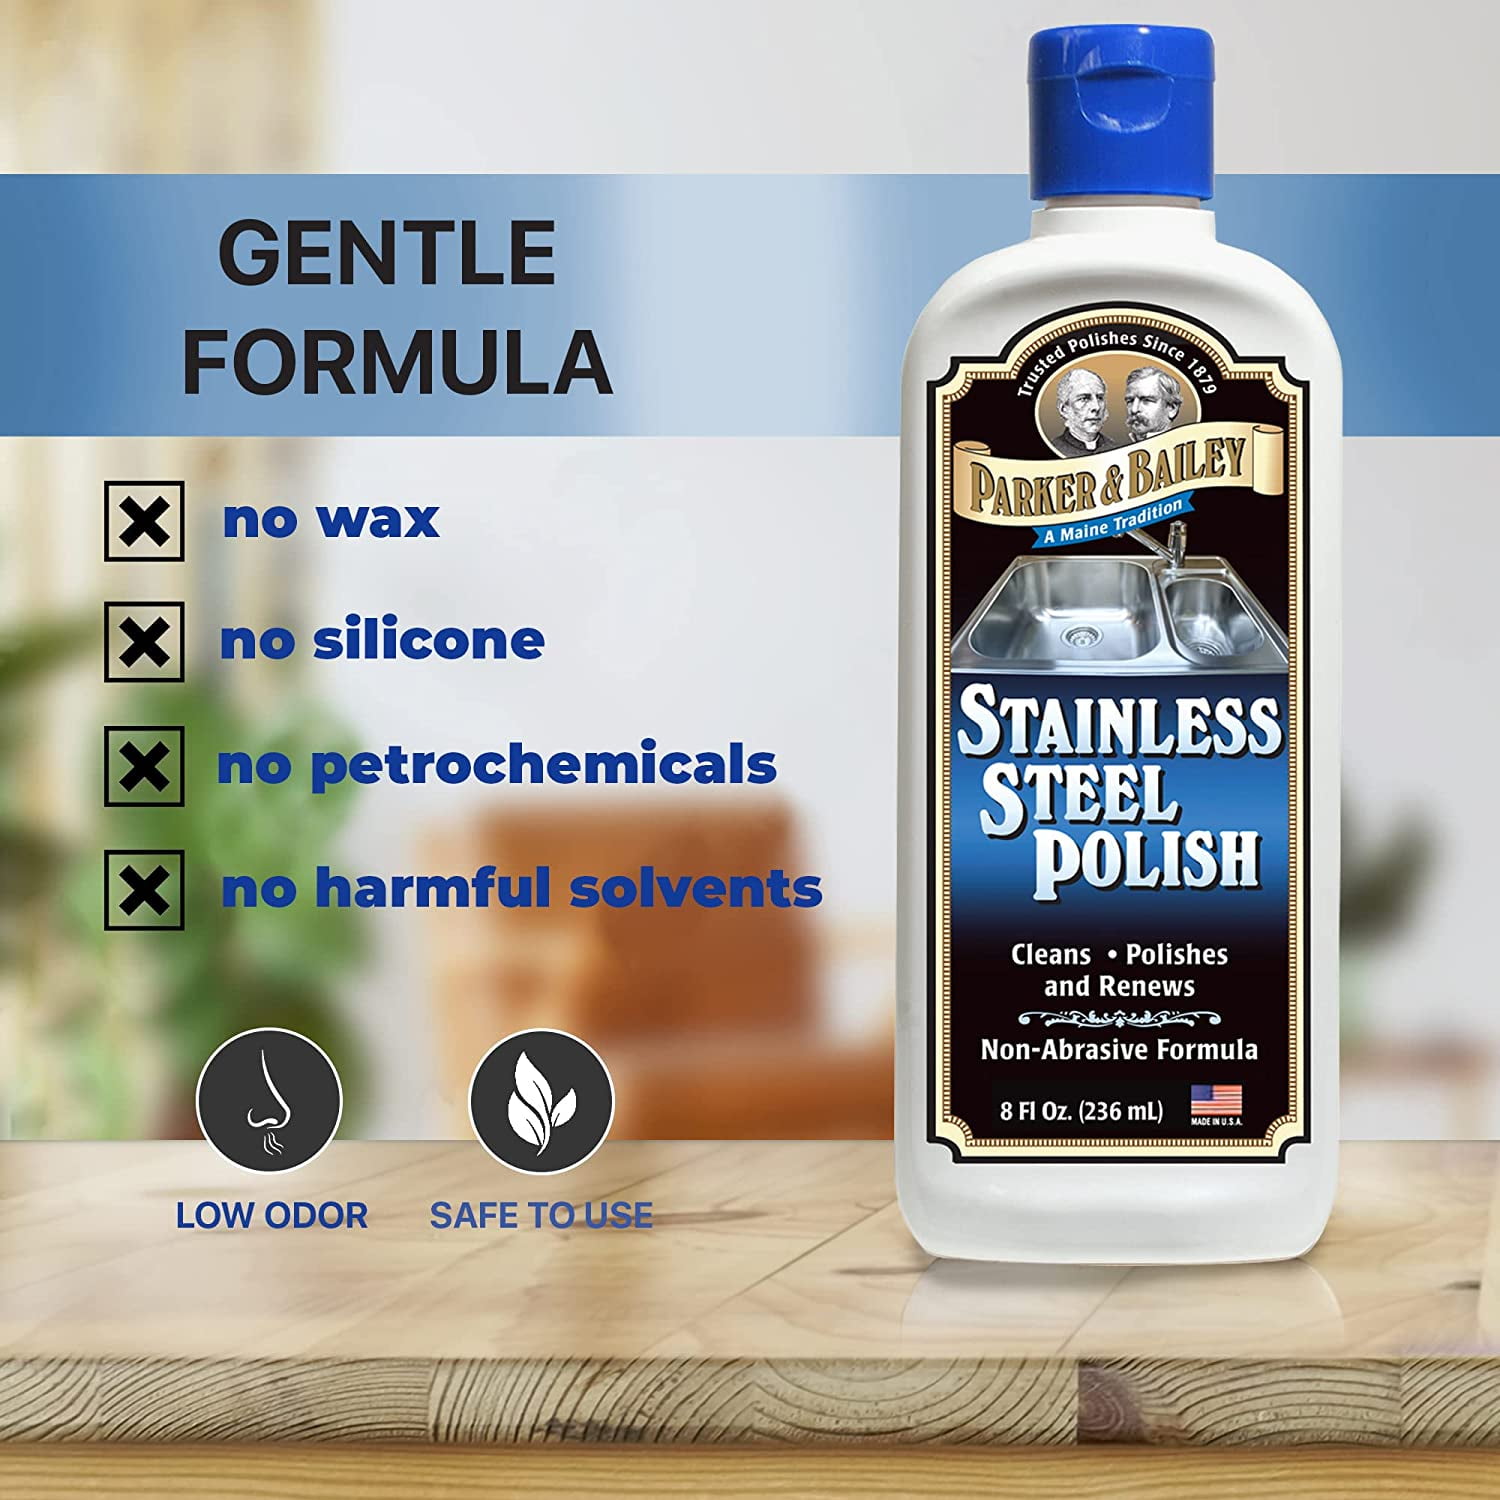 Parker & Bailey Stainless Steel Polish Non-Abrasive Cleans Polishes Renews  8oz.